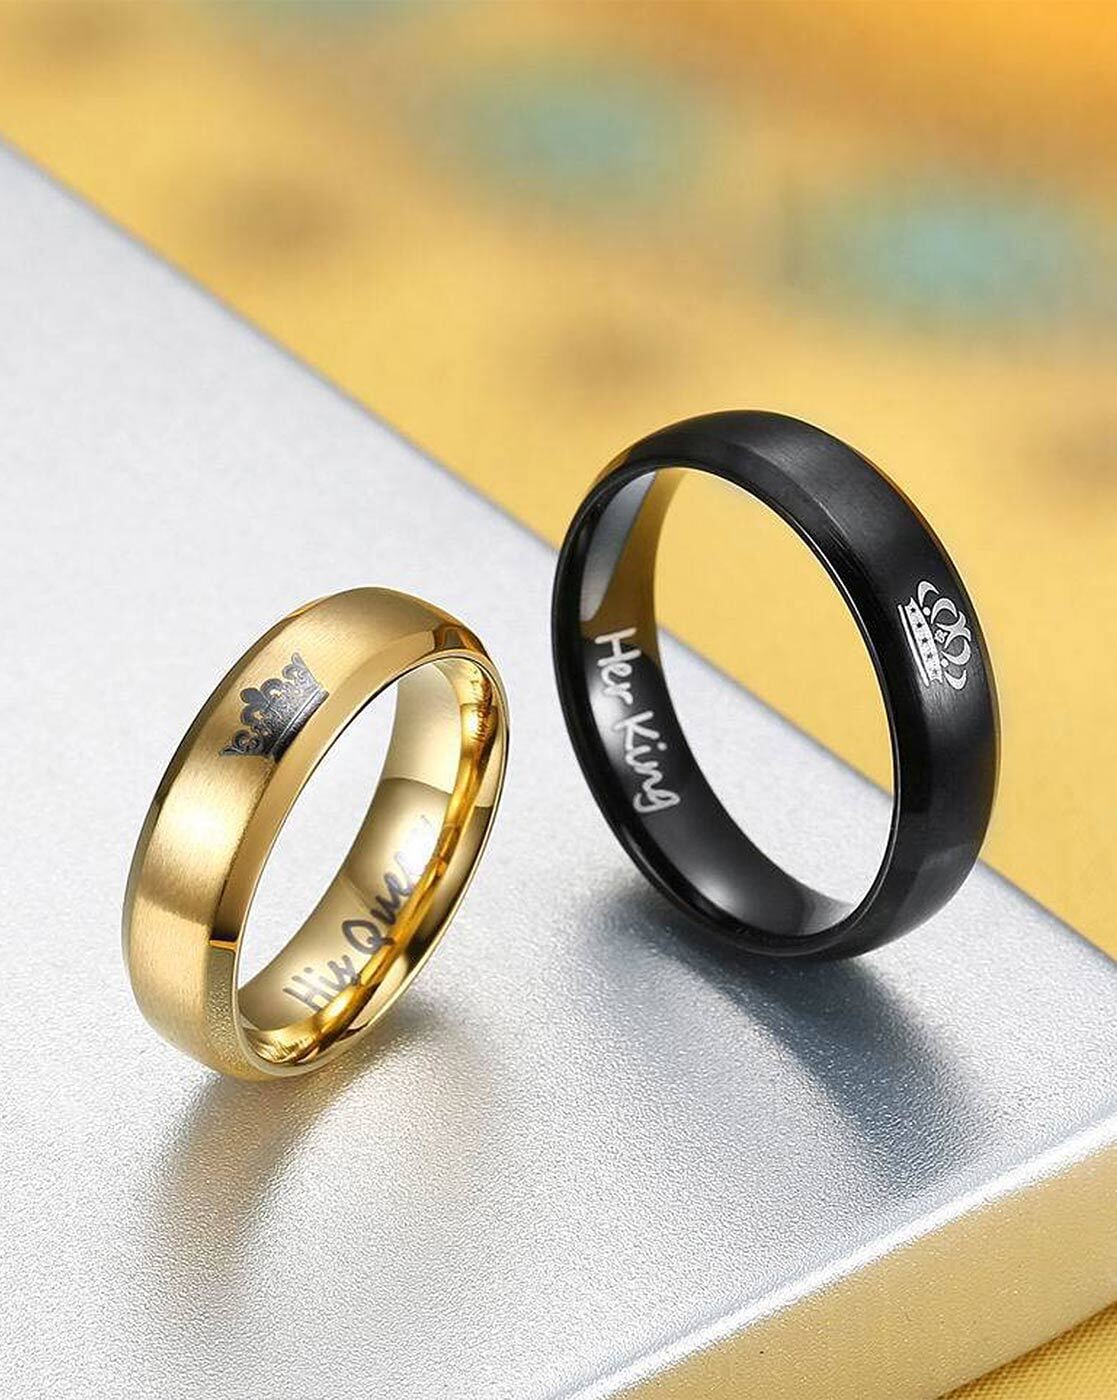 Black Couple Rings - Personalized Promise Rings Set Under $100